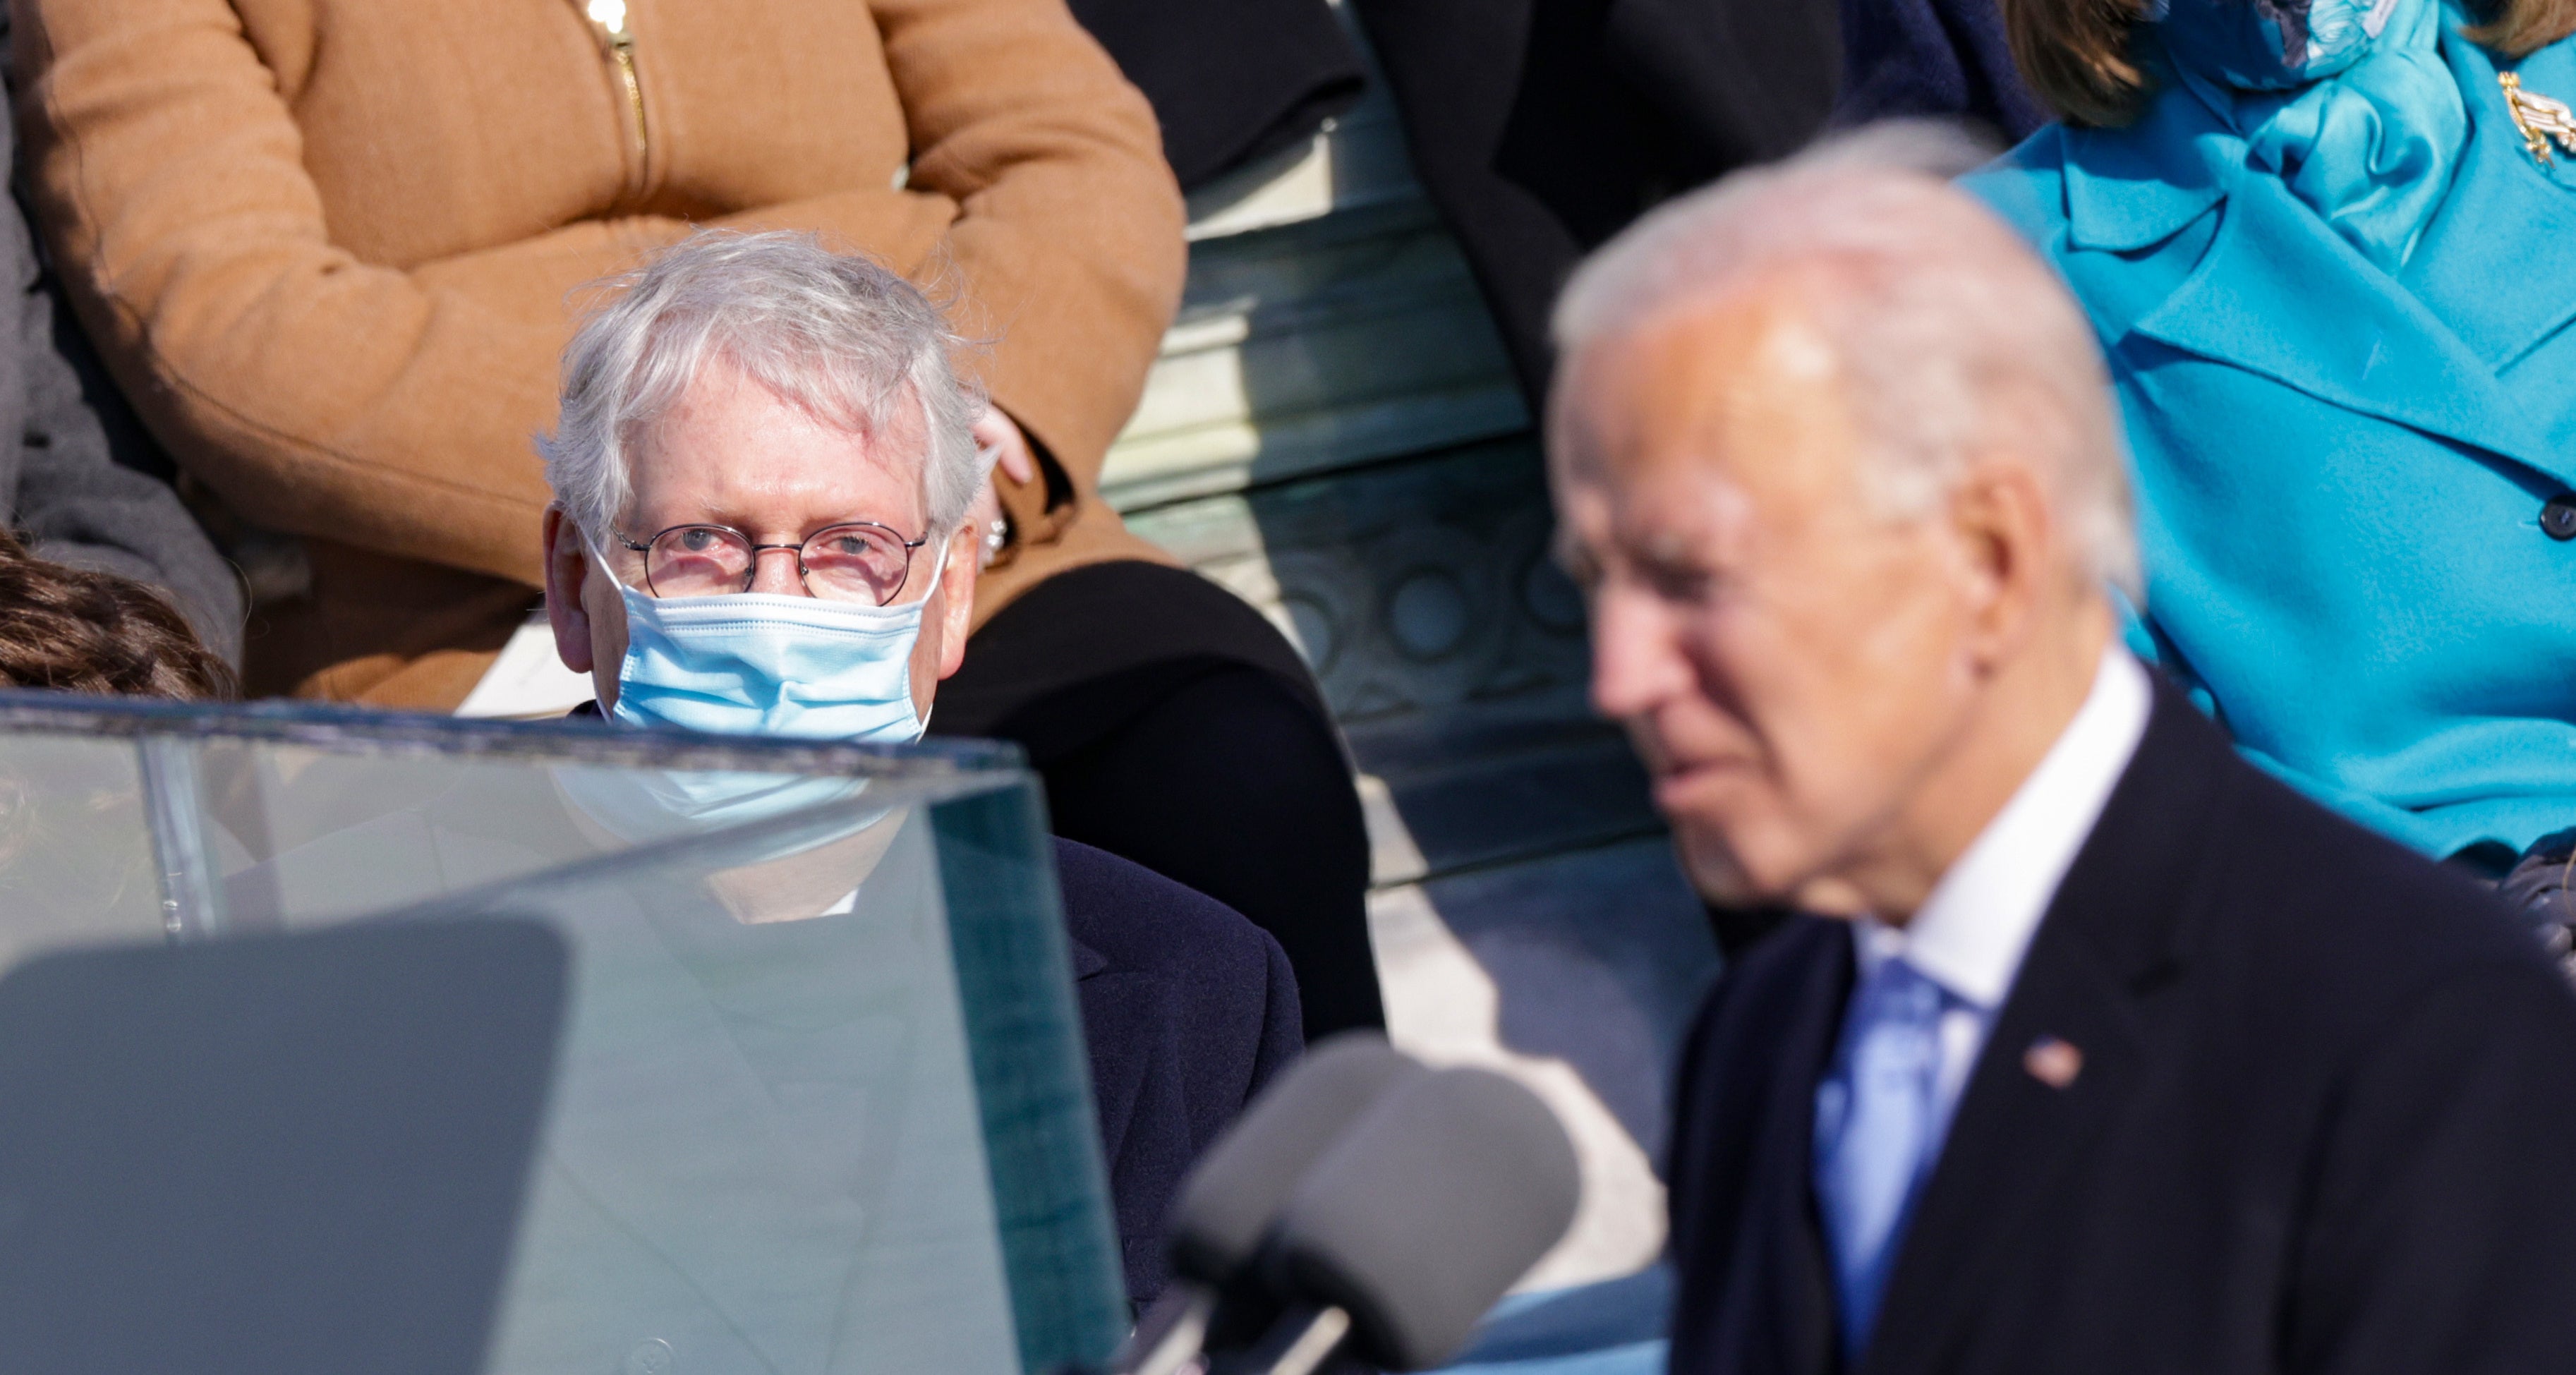 Senate Republican leader Mitch McConnell looks on as President Biden delivers his inaugural address 